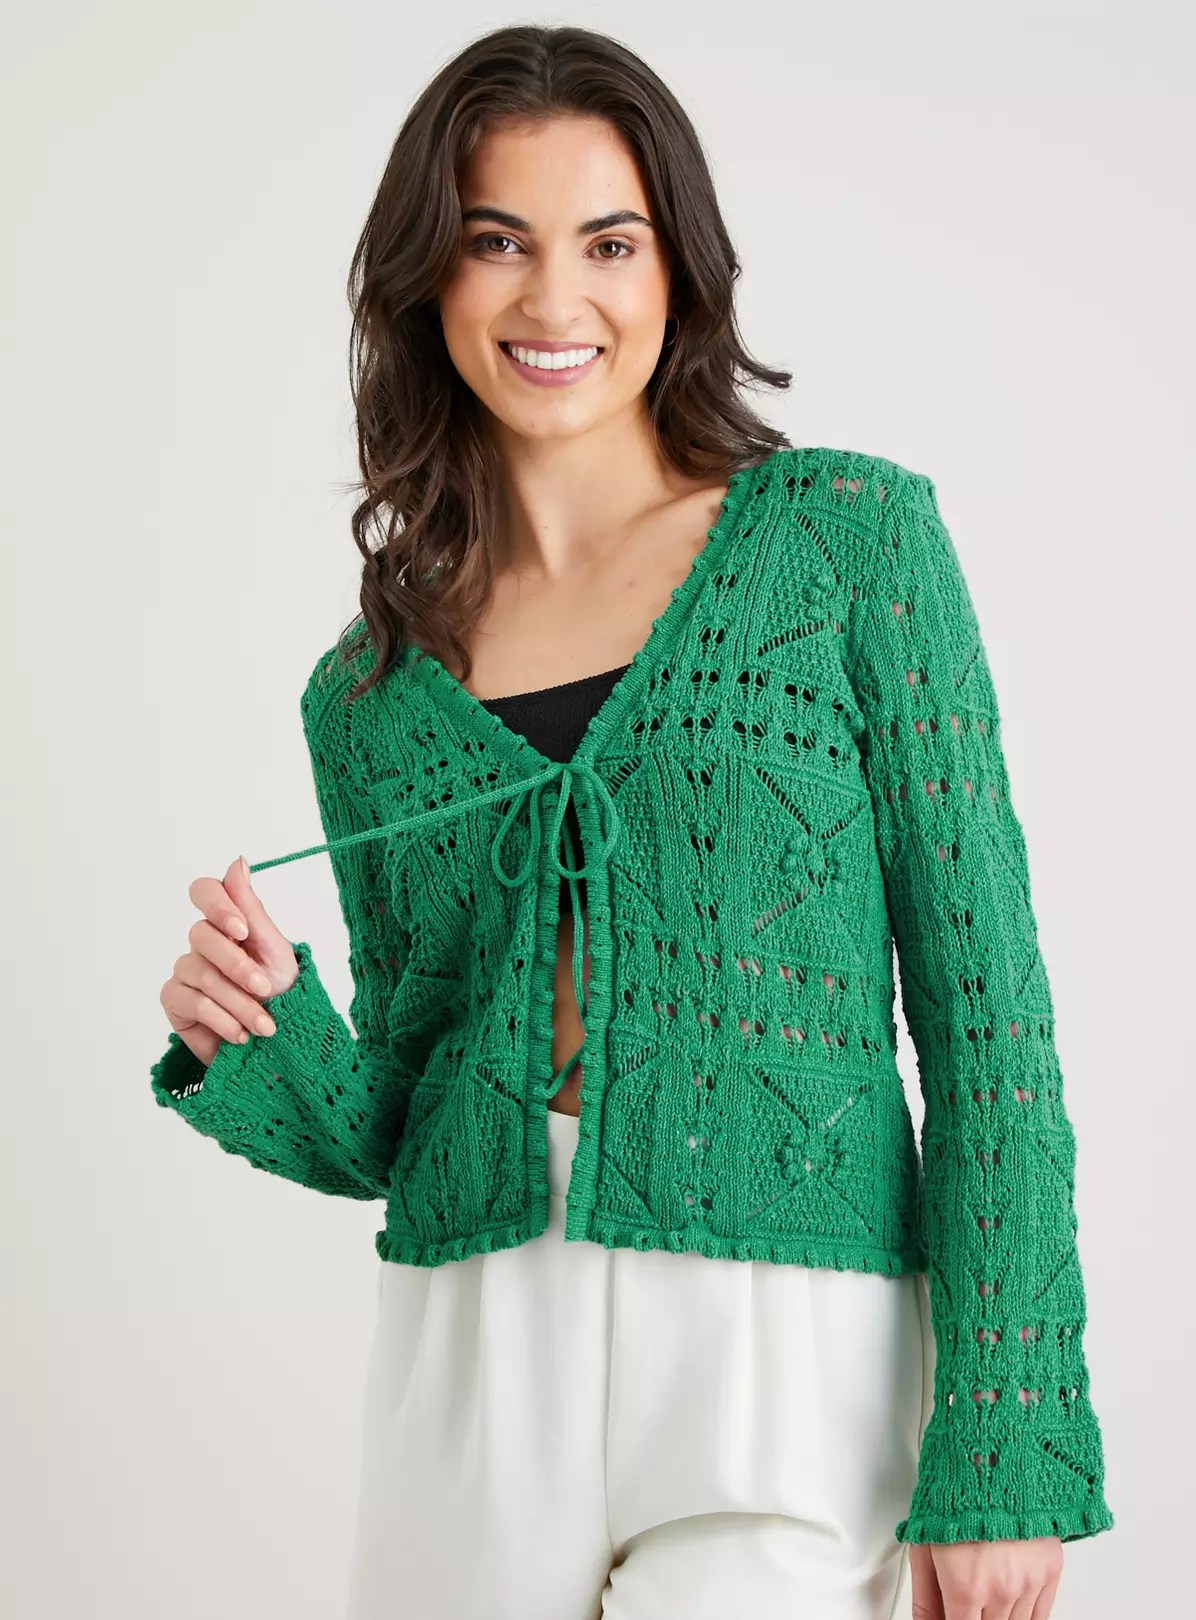 Green Pointelle Knit Tie-Front Cardigan from Tu Clothing